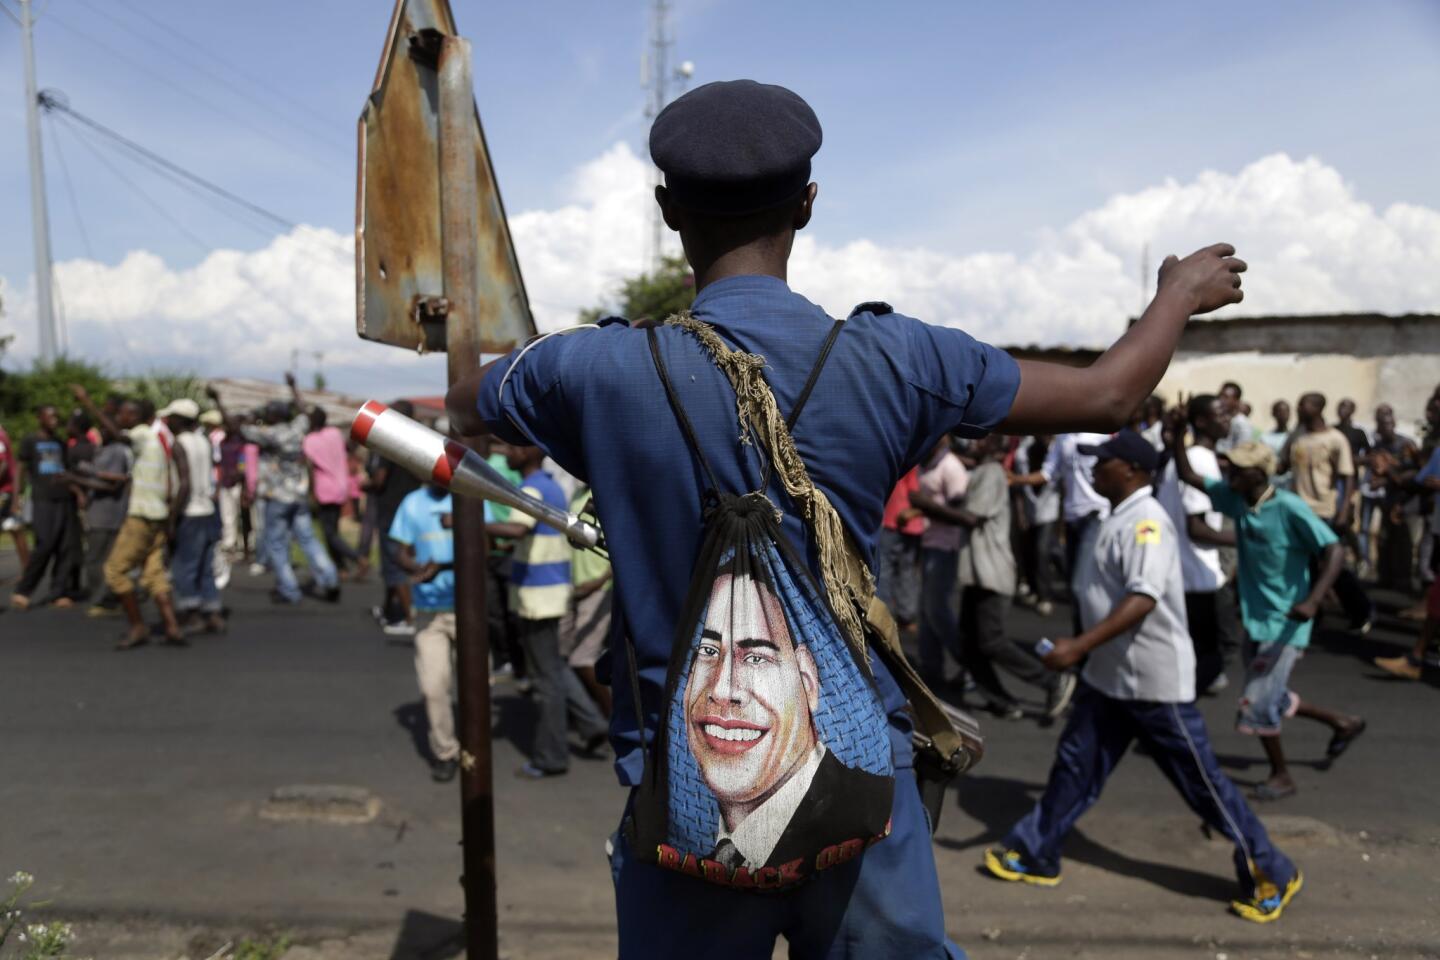 A police officer keeping watch on demonstrators in Bujumbura, Burundi, carries a bag with the portrait of President Obama.